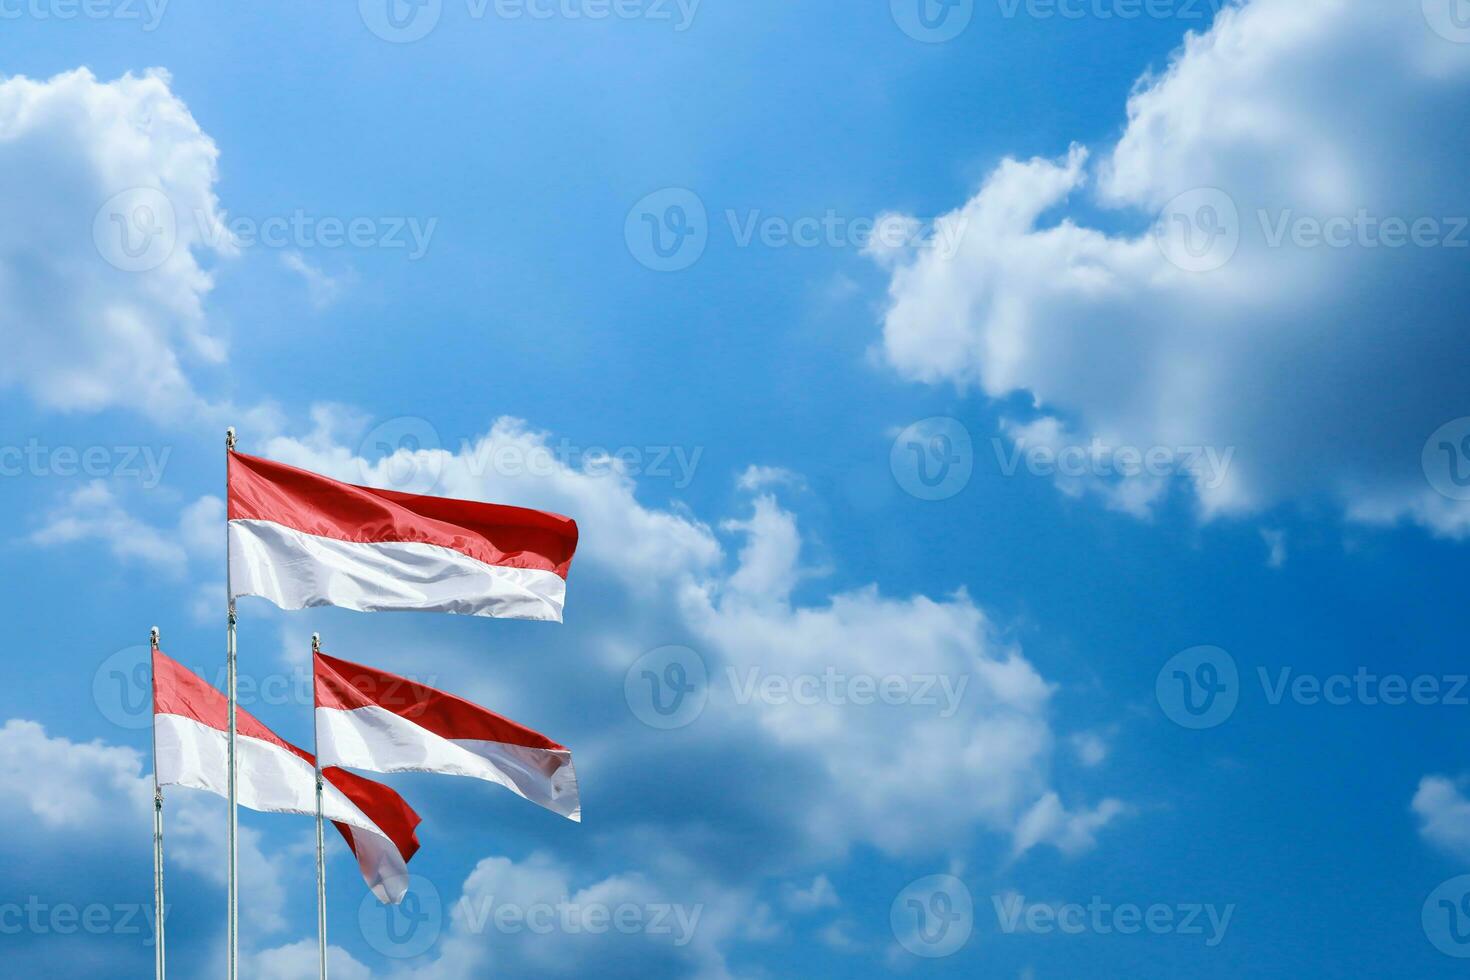 17 August 1945, Indonesian flags against sky background. Independence day concept photo